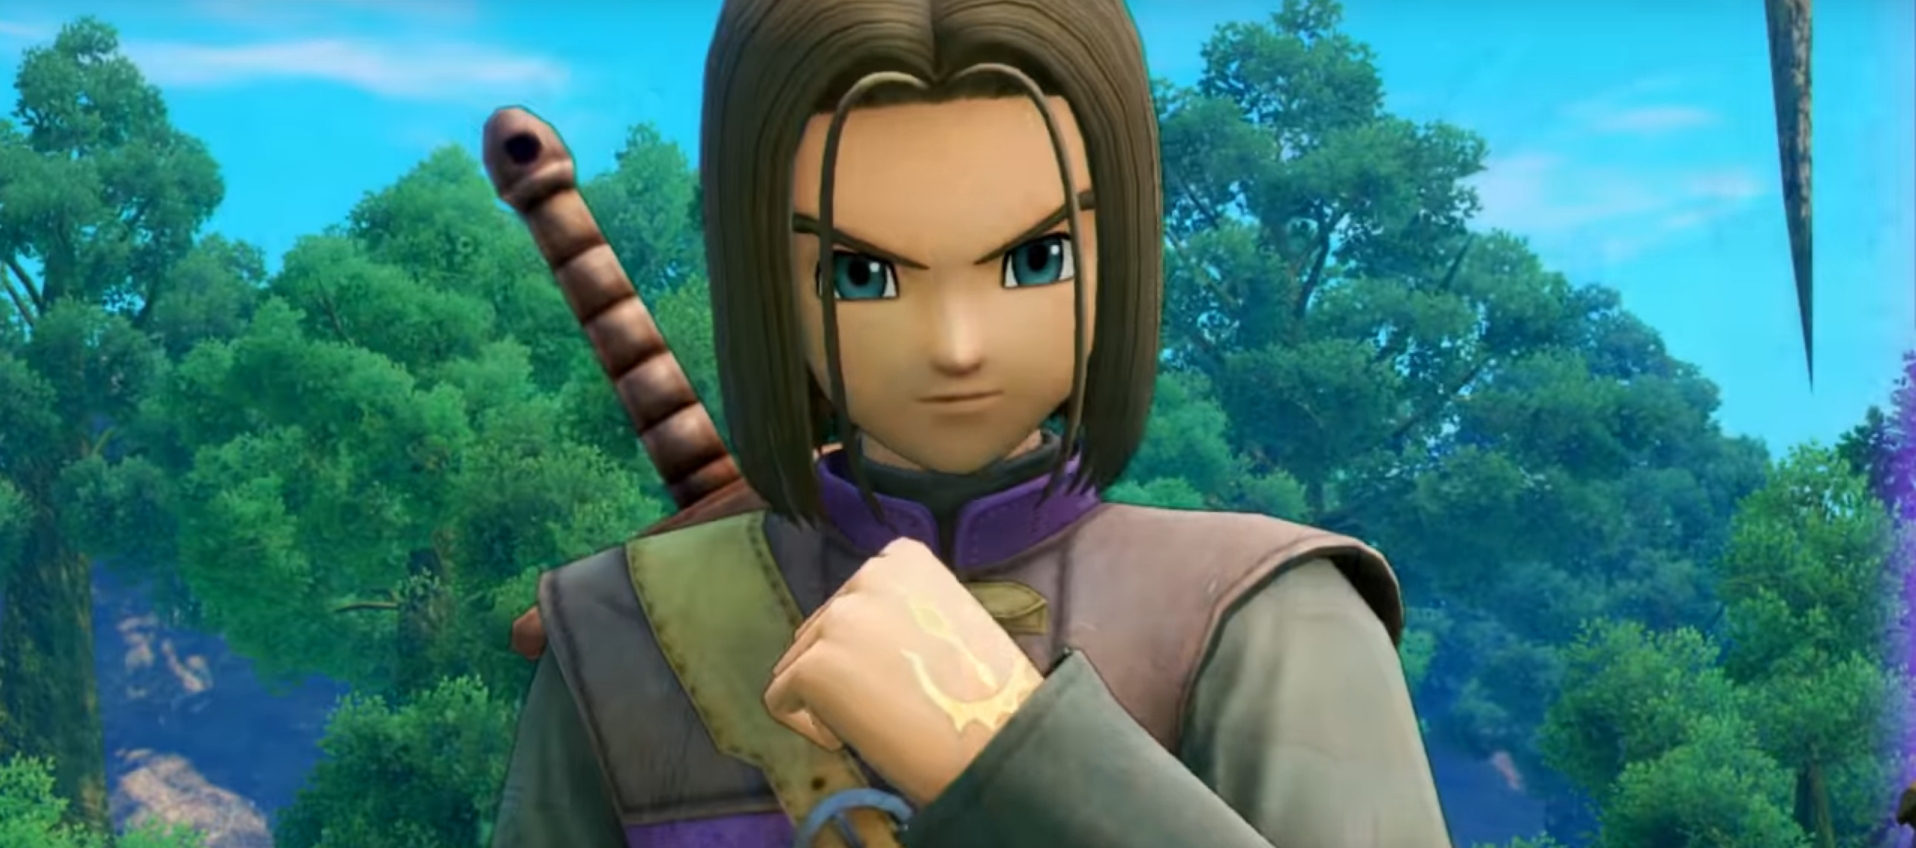 Dragon Quest XI Has Been Removed From Both Steam And PlayStation Network After Re-Release